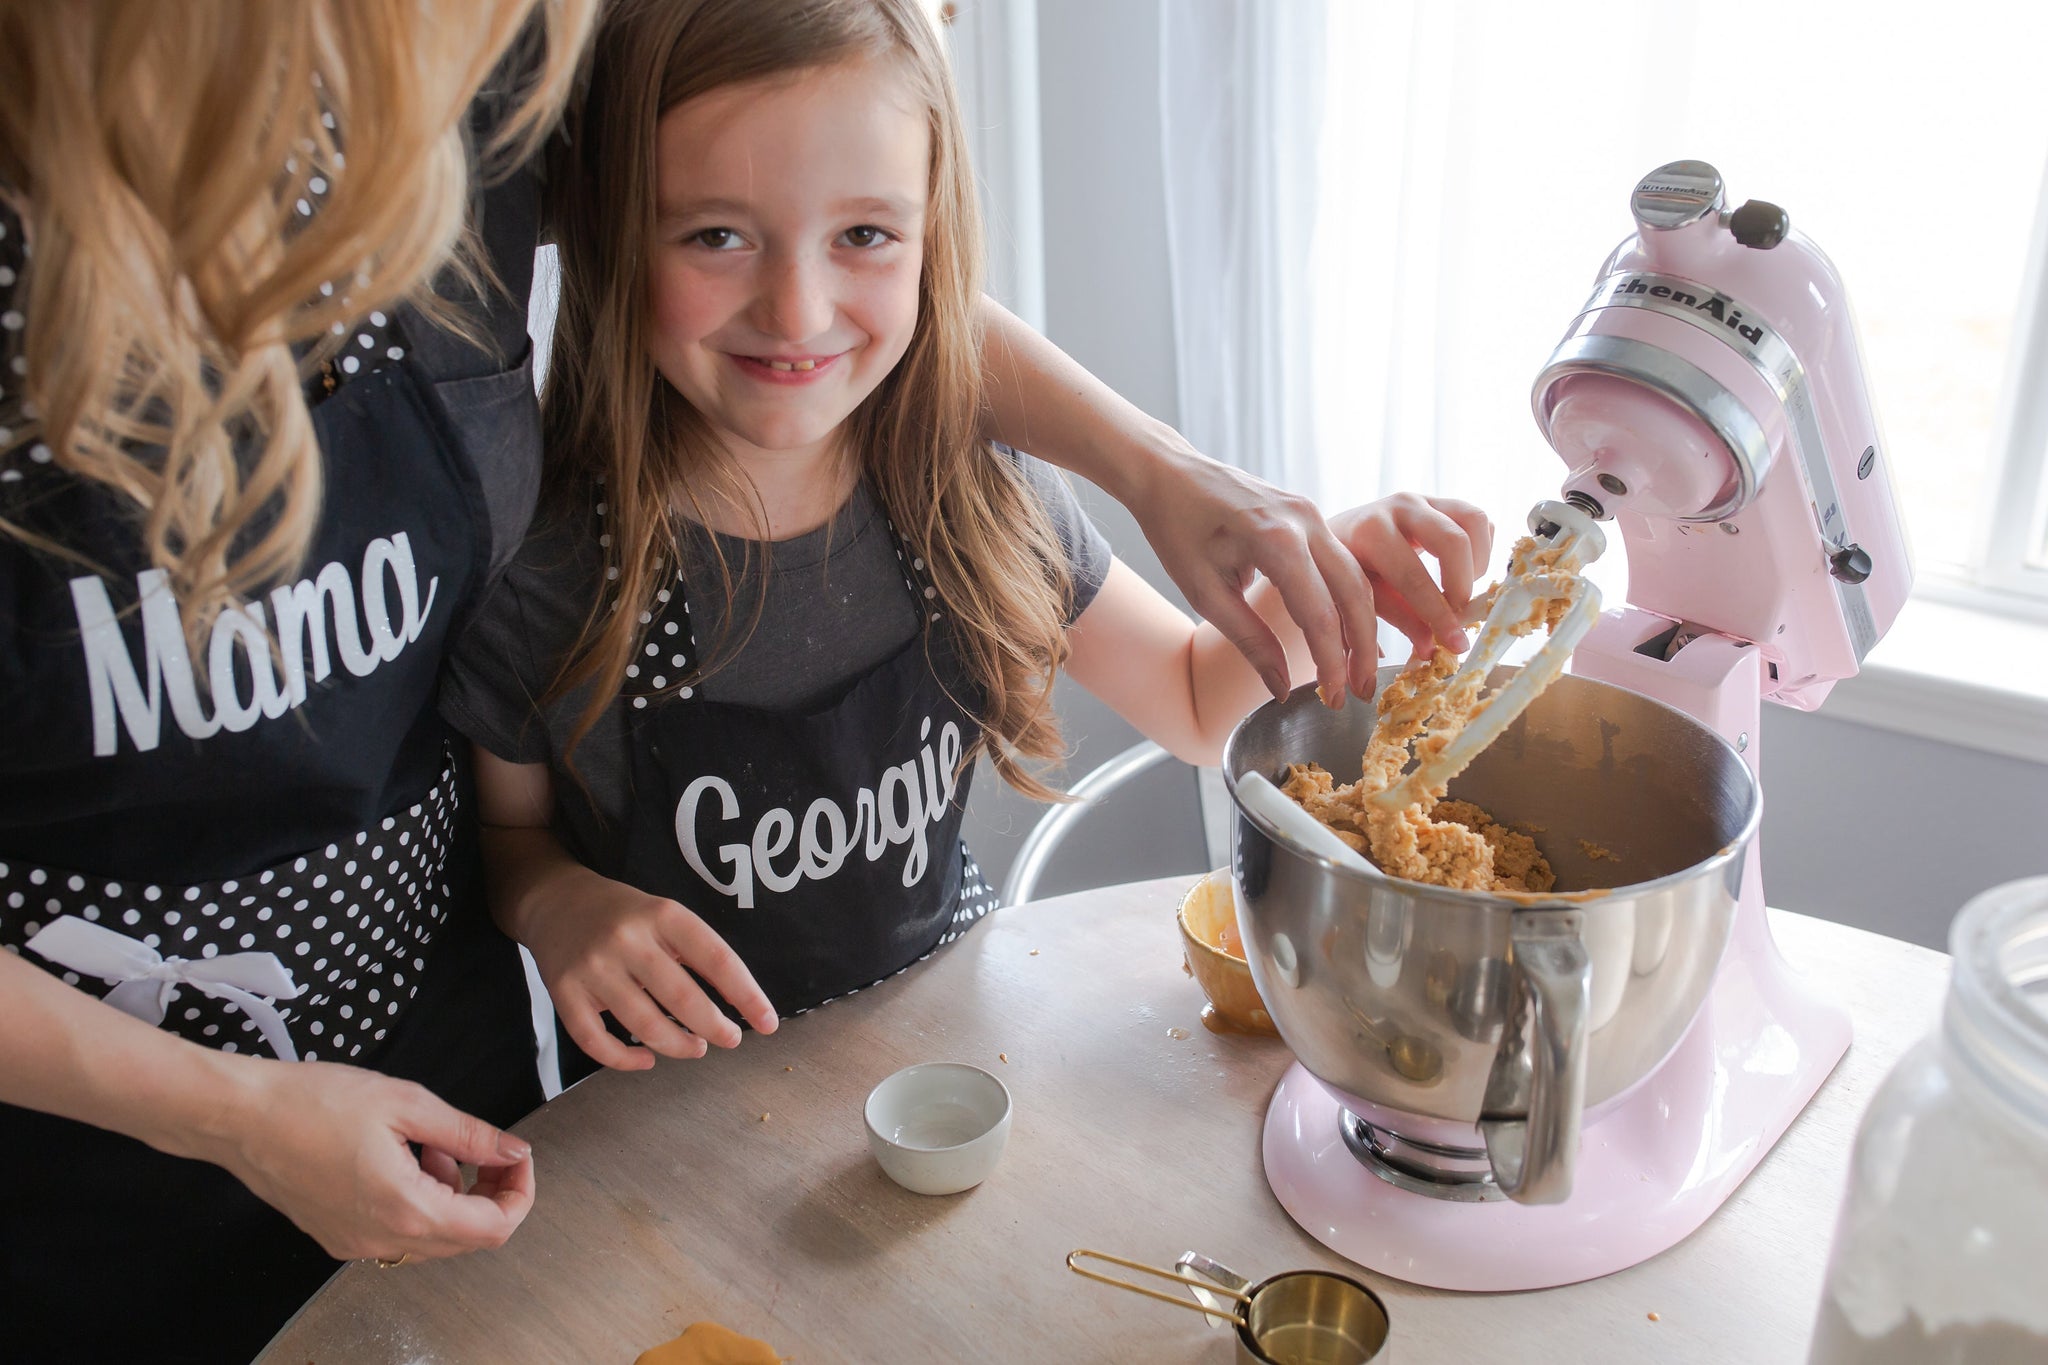 Personalized Mother & Daughter Apron Set - Baking with Mommy